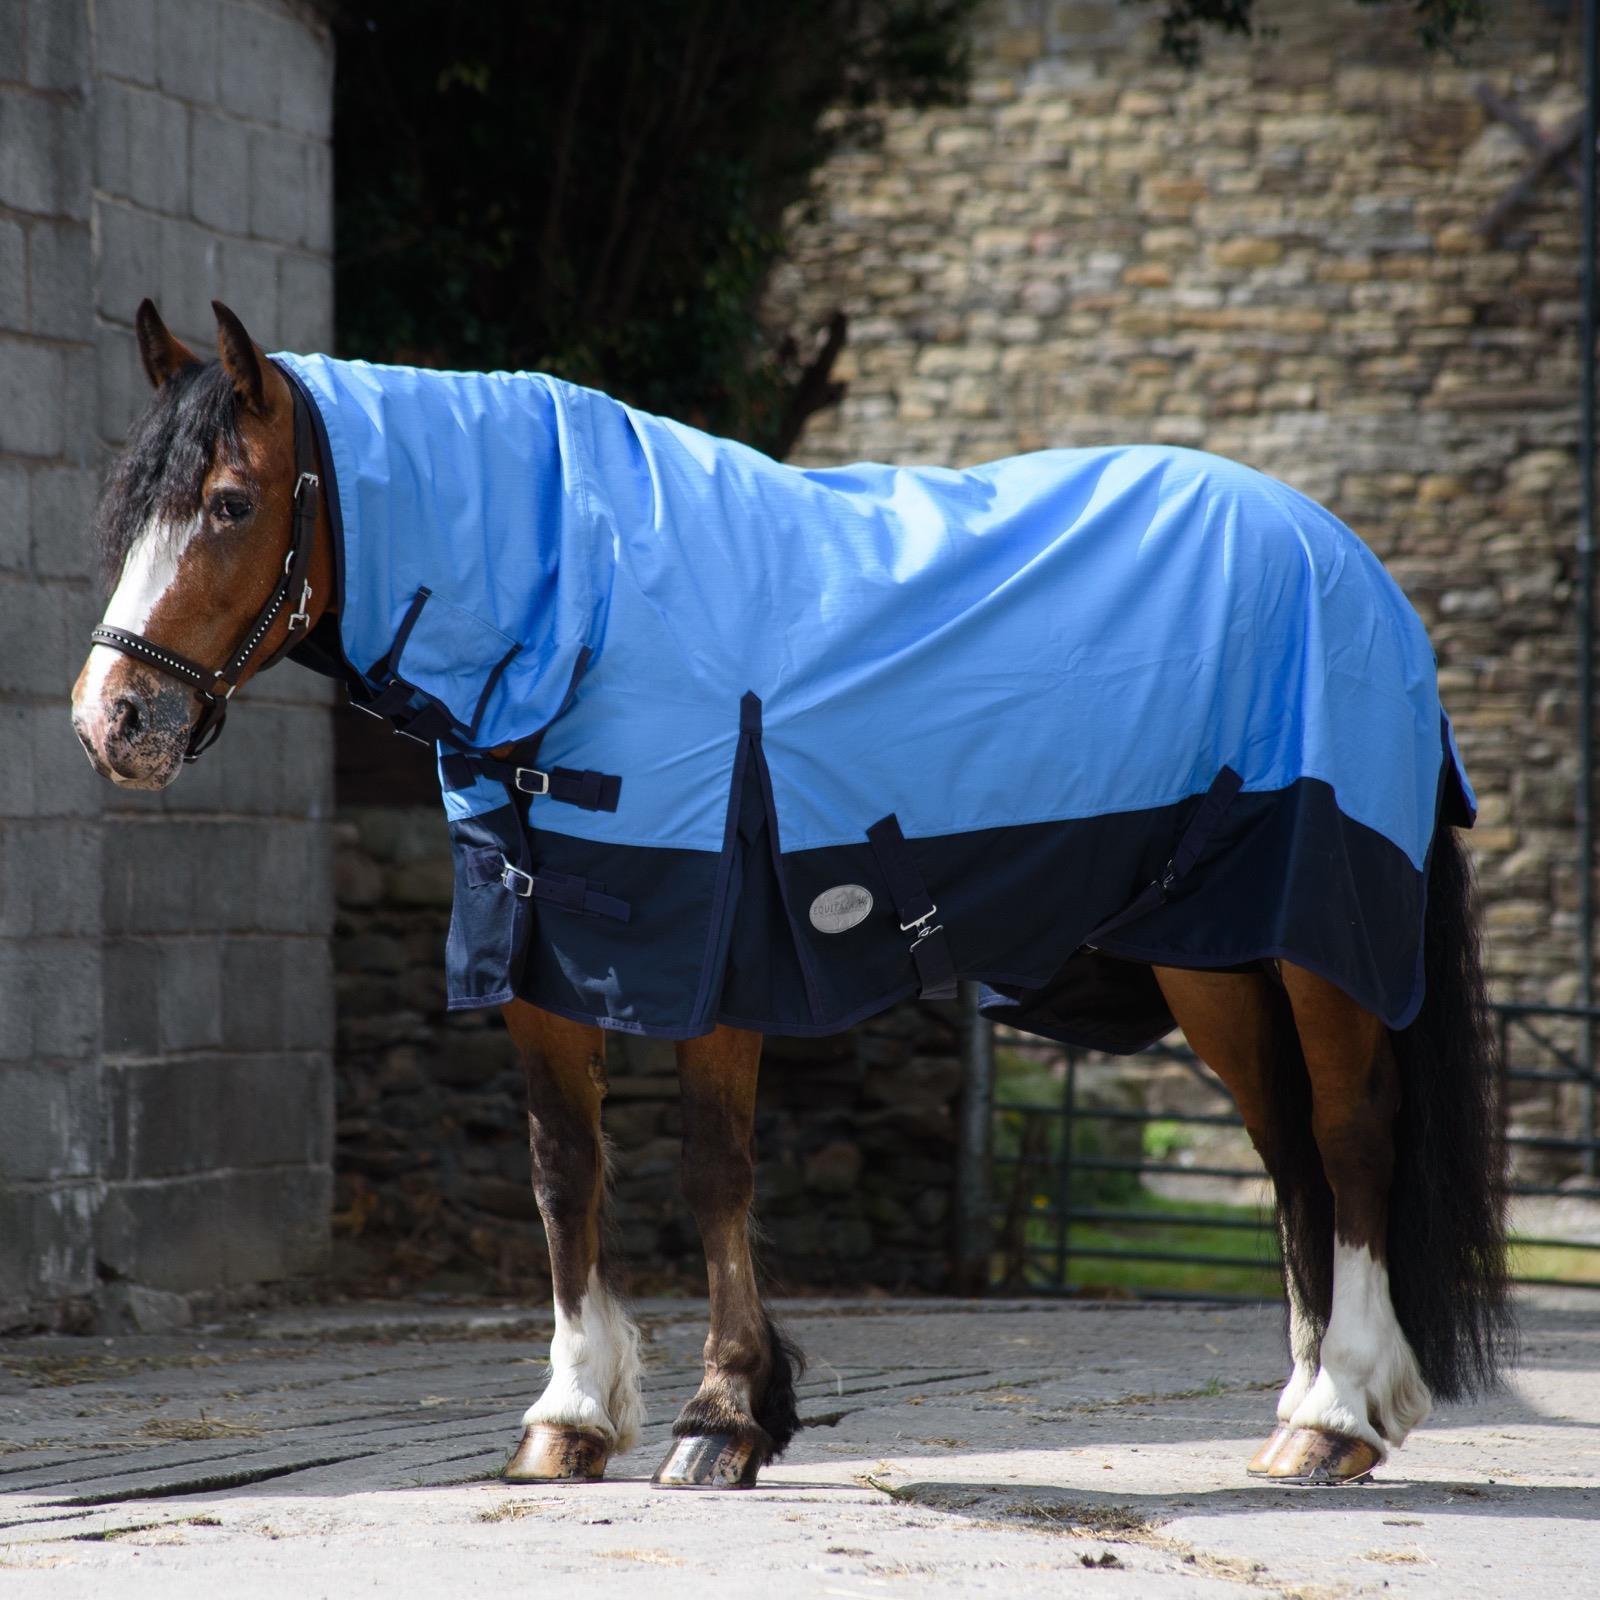 600D Outdoor Winter Turnout Horse Rugs 50G Fill COMBO Full Neck Blue/Navy 5'3-6'9 - Tack24